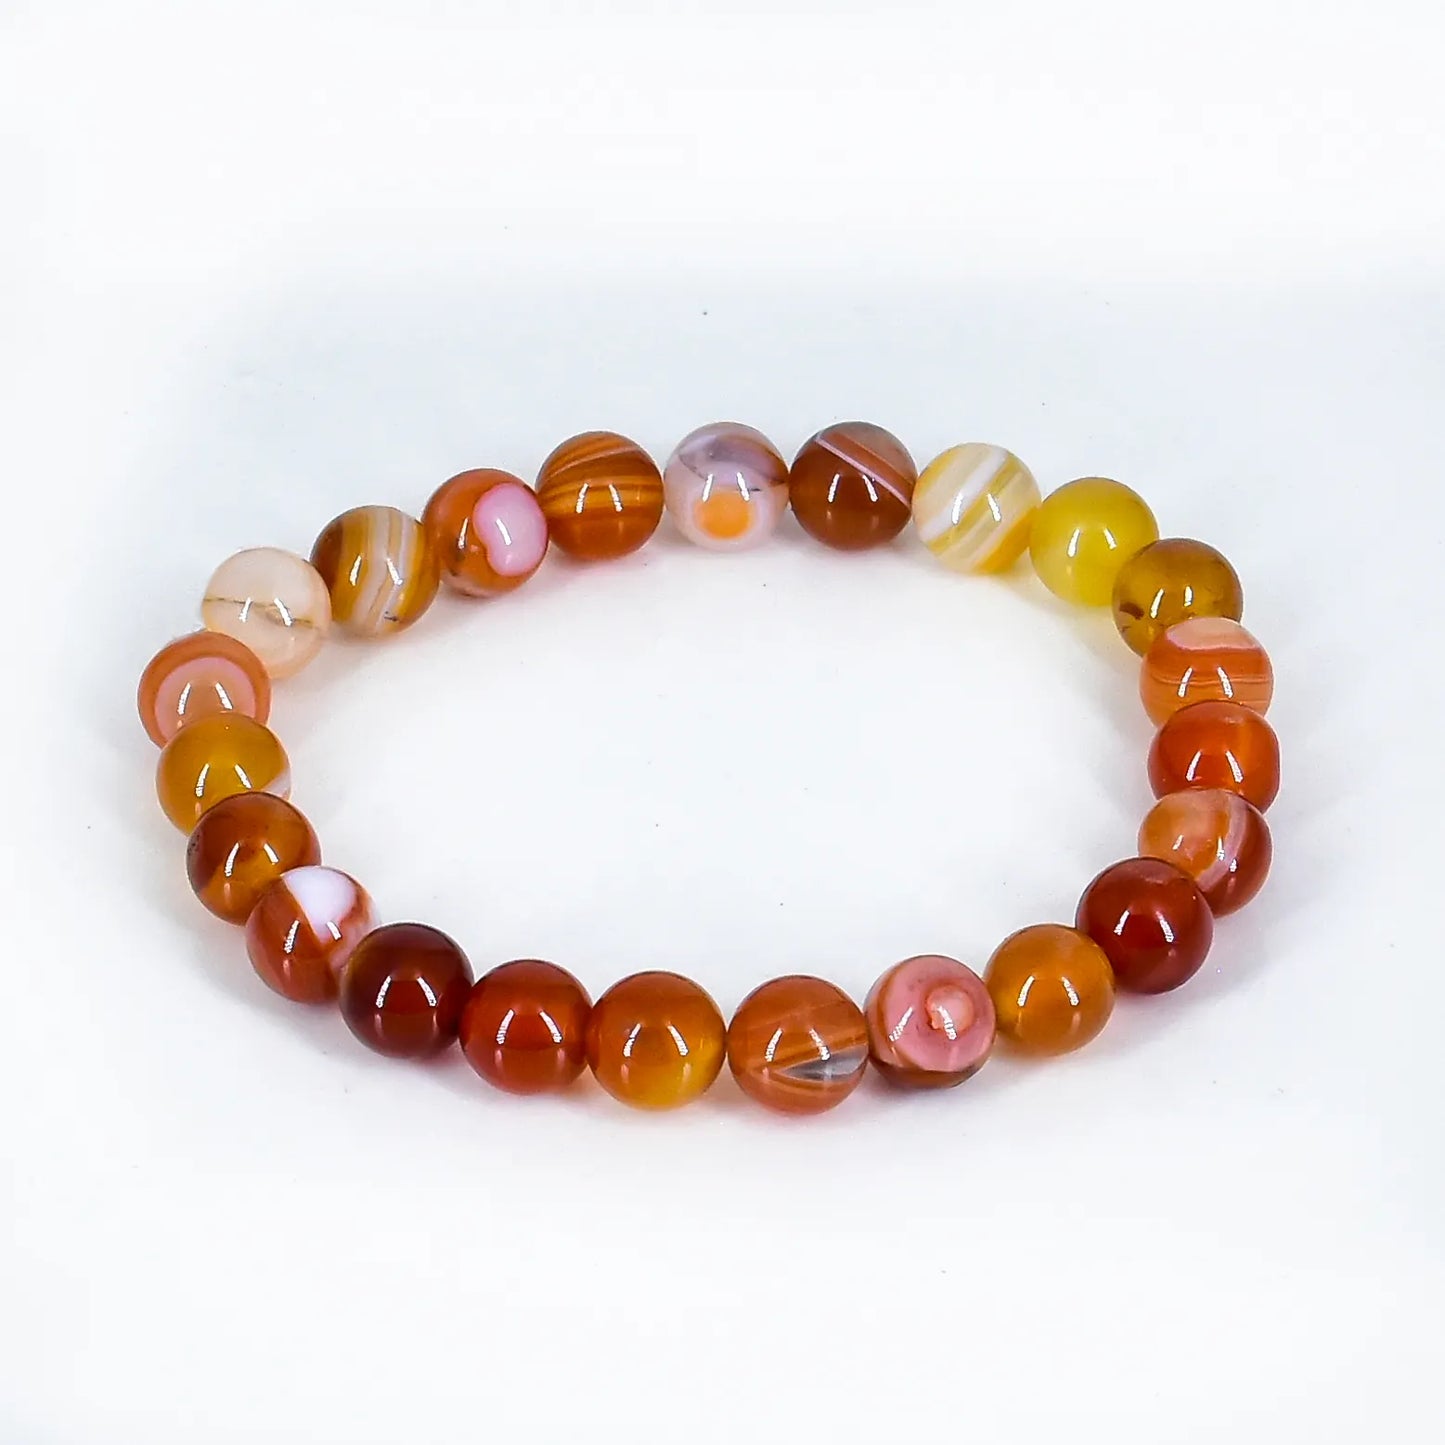 Reshamm Pre-Energized Unisex Premium Red Sulemani Natural Crystal Stone Bracelet for Spritual Insight, Emotional Balance and Root Chakra Alignment